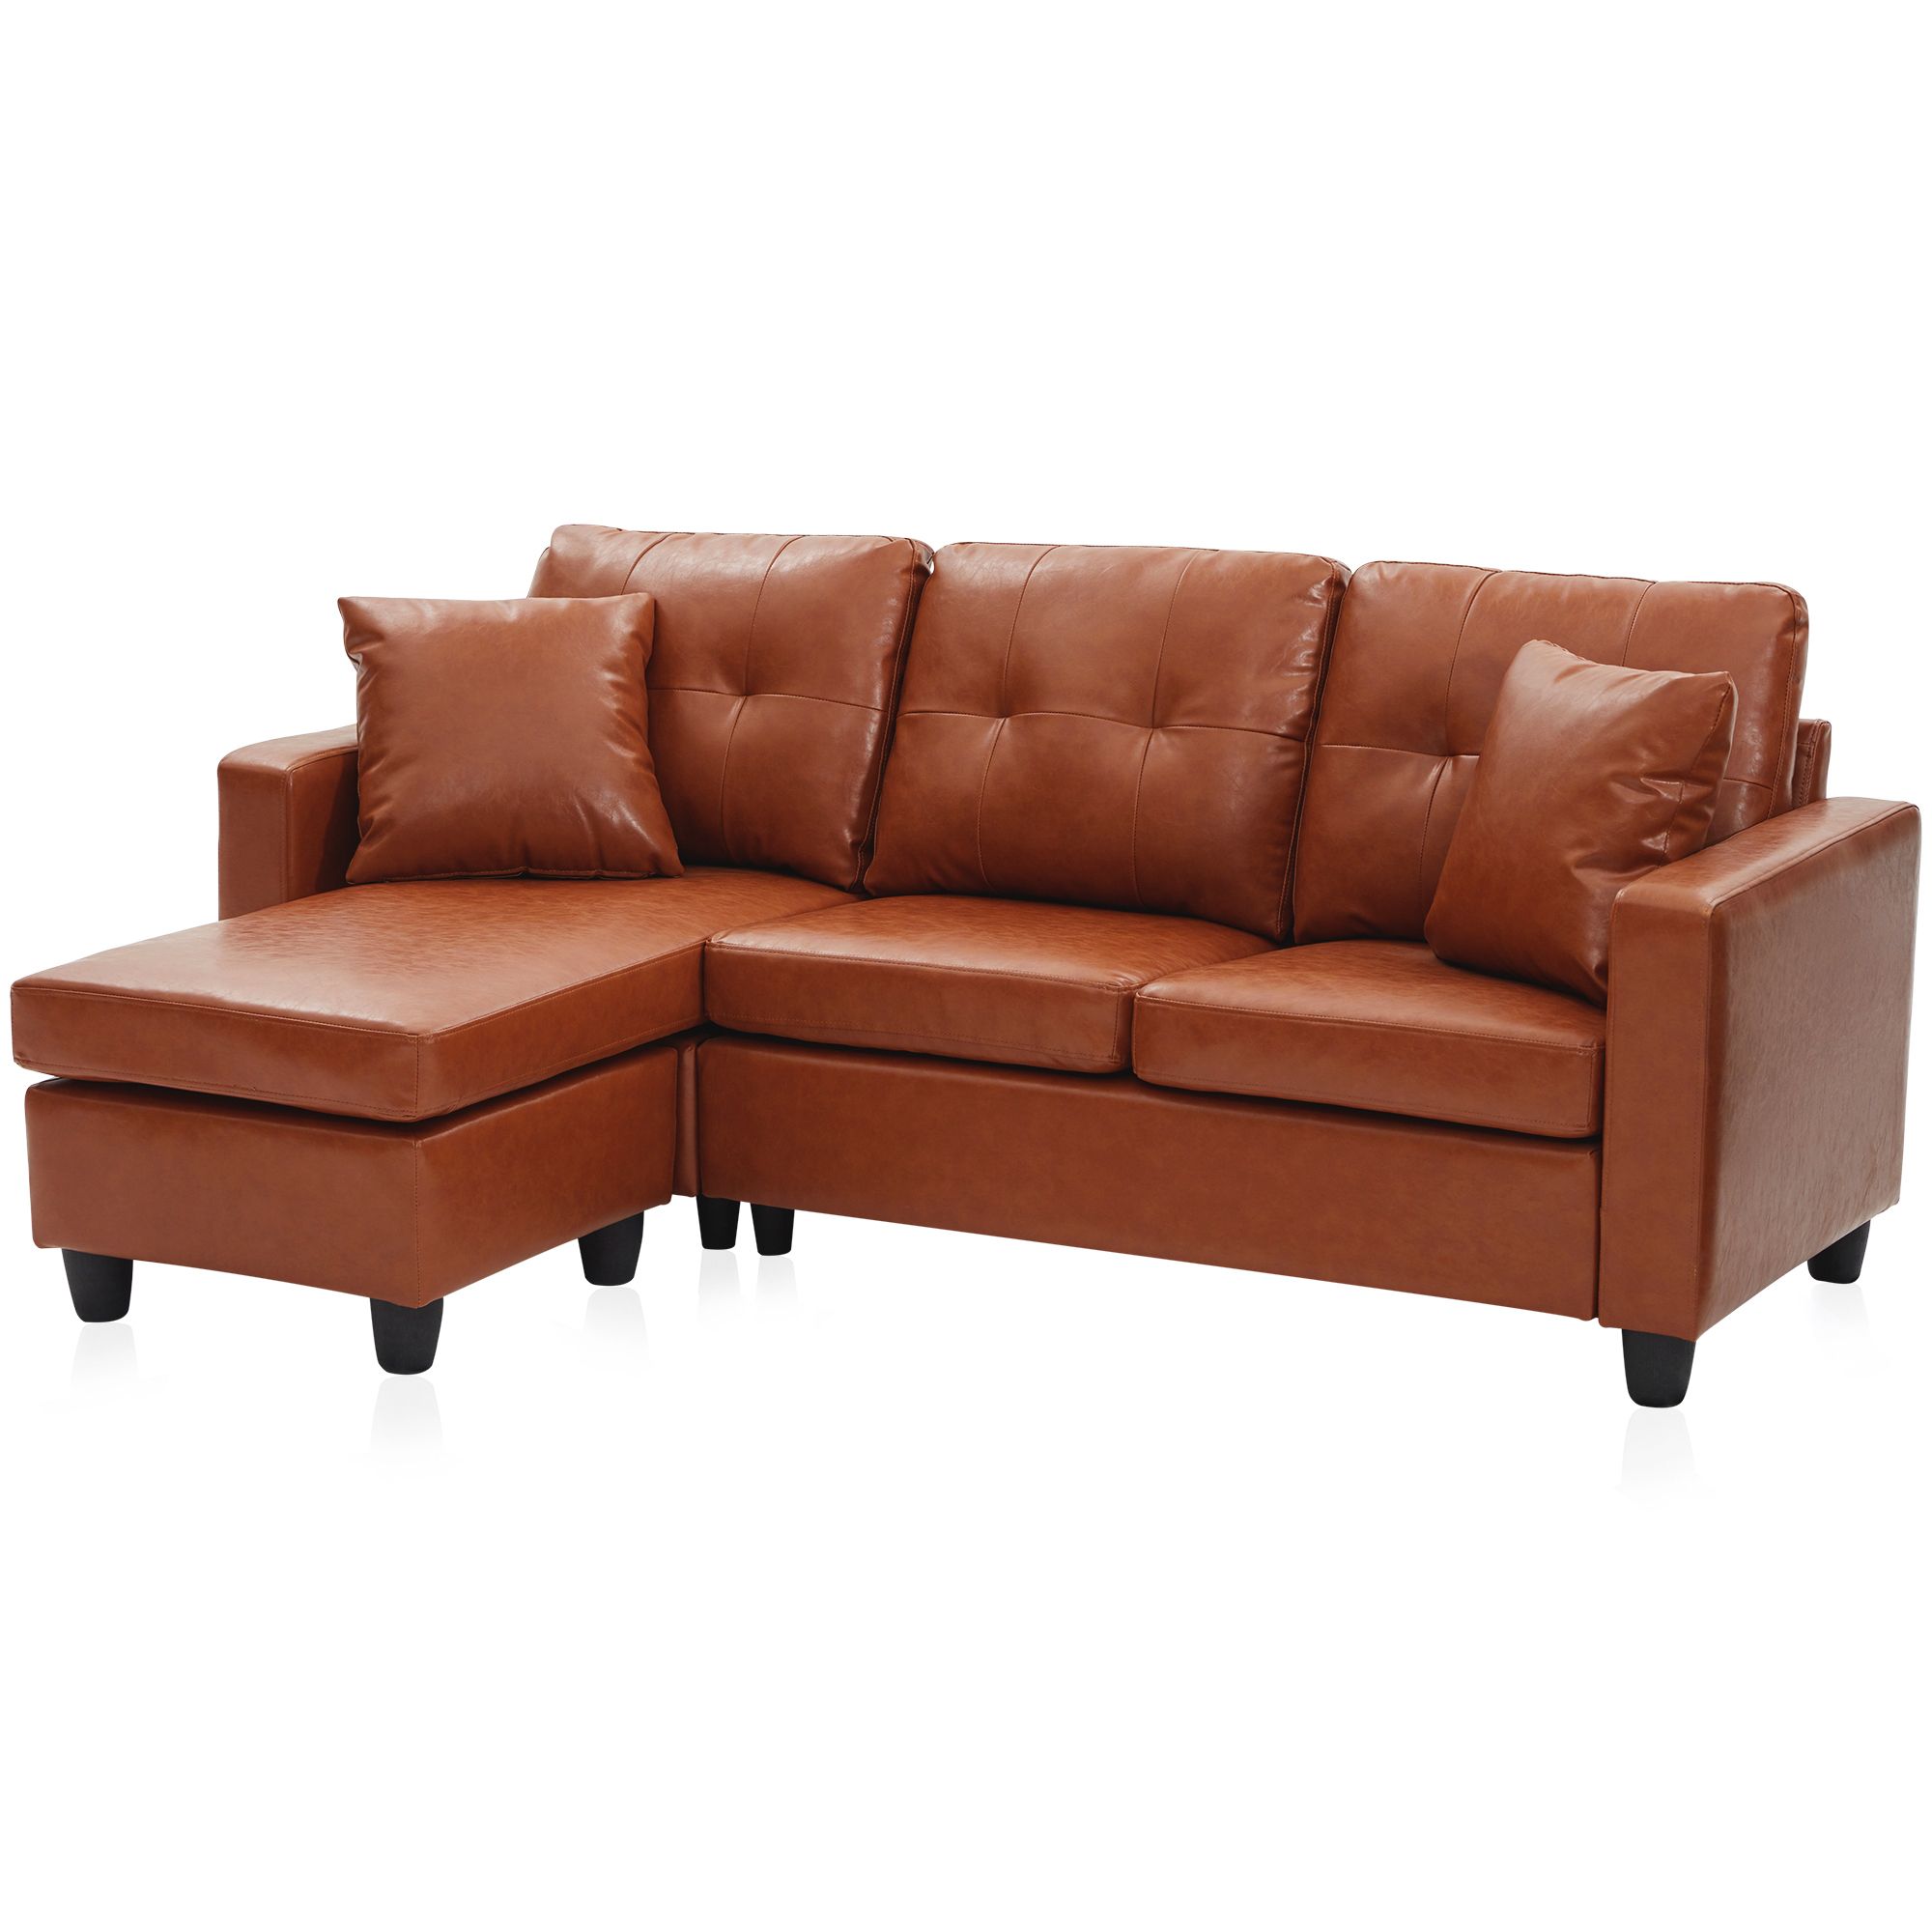 L Shape Couches With Reversible Chaises Throughout Most Recently Released Linen/ Faux Leather Sectional Sofa, L Shaped Couch 3 Seat W/ Reversible (View 8 of 15)